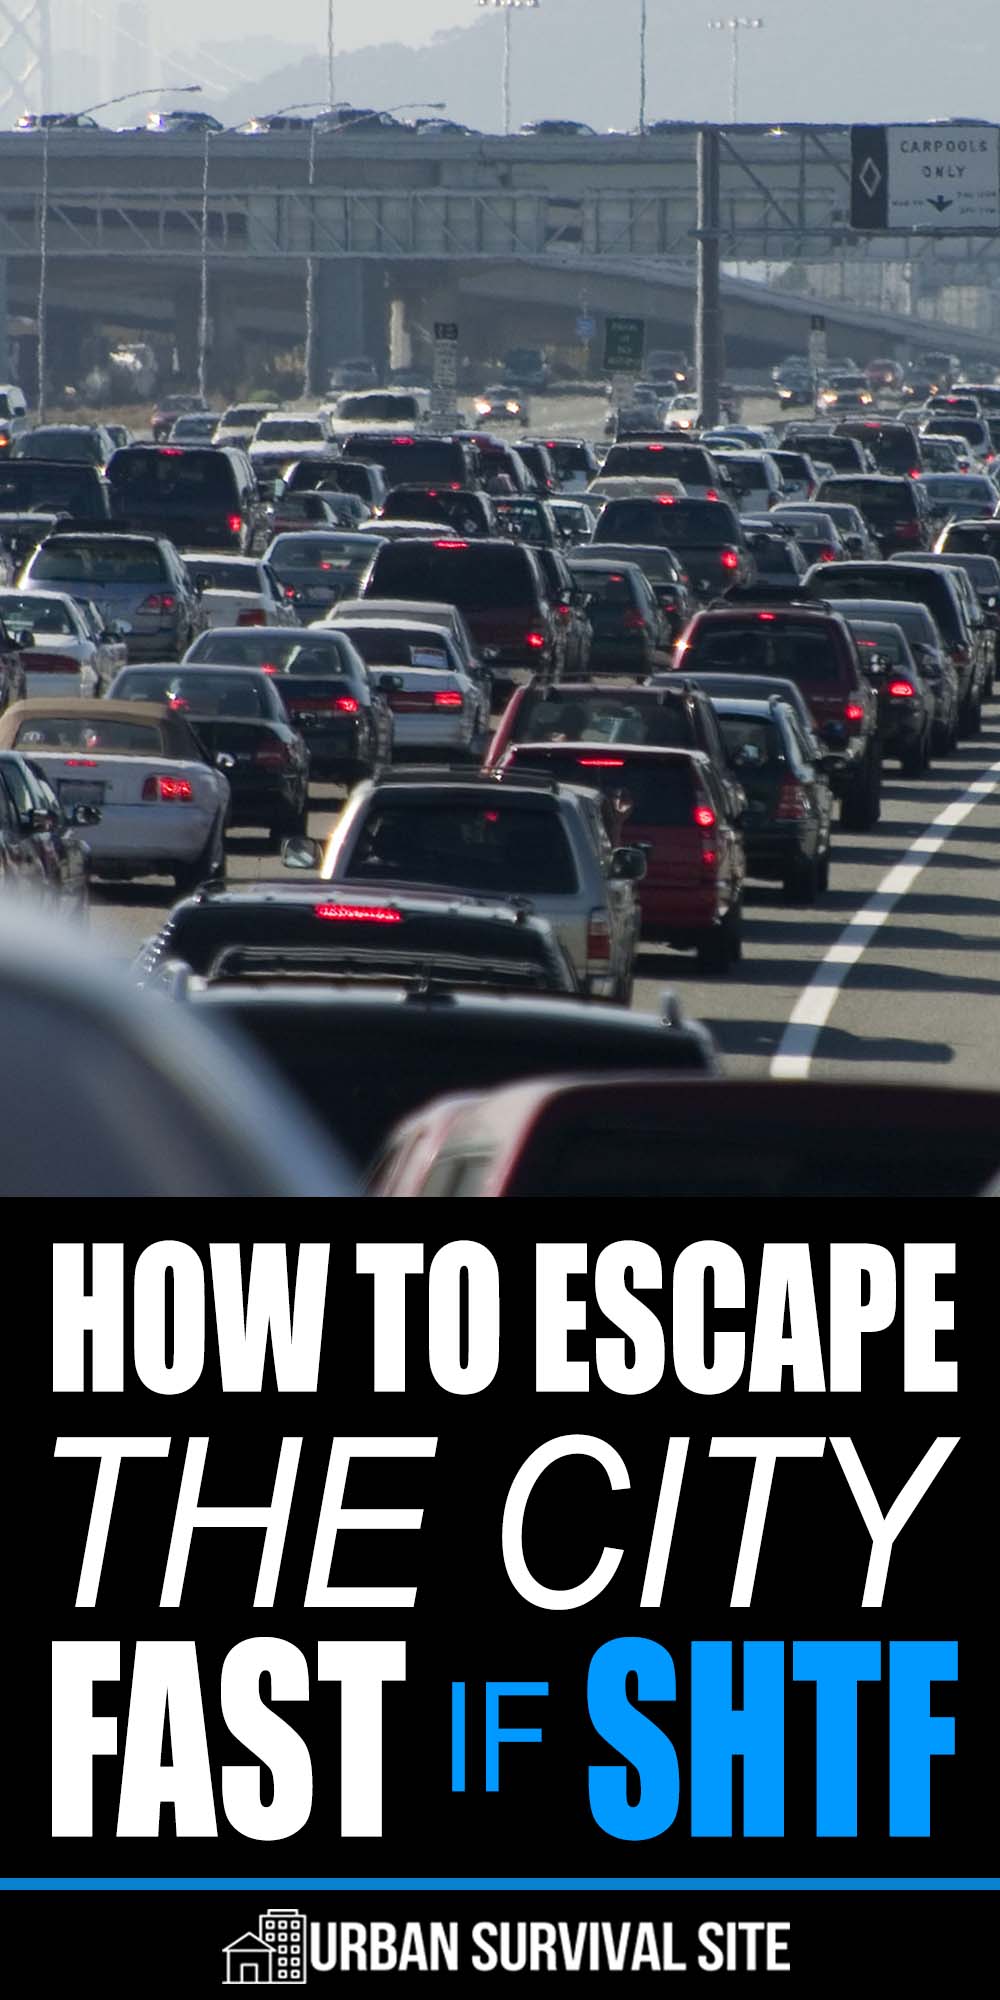 How To Escape The City FAST If SHTF